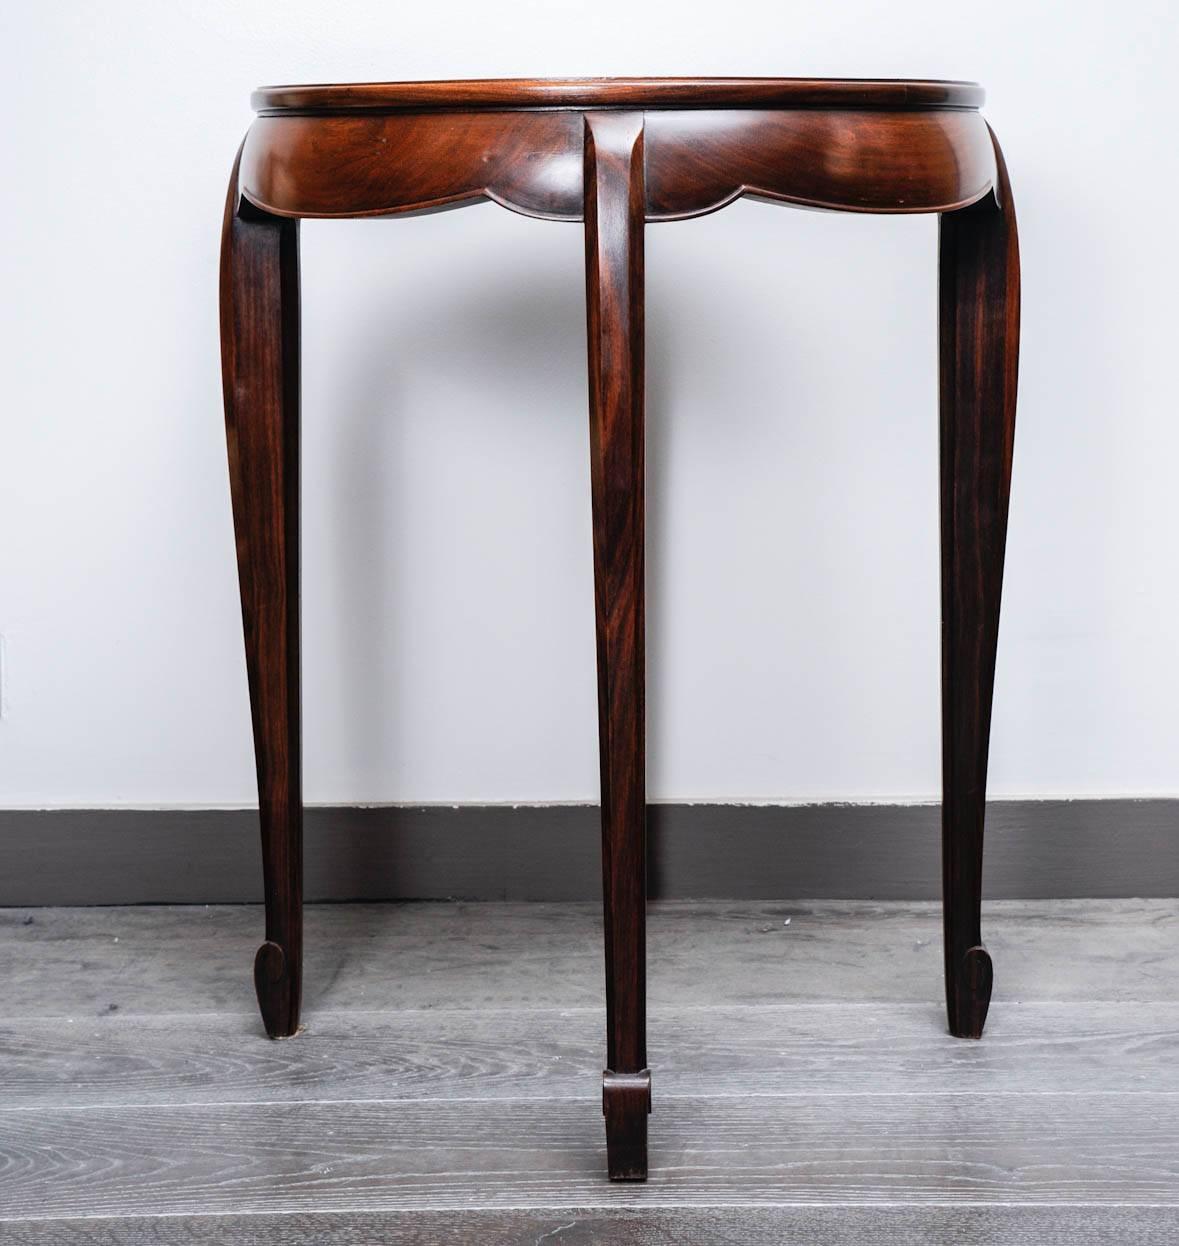 Elegant table or gueridon in rosewood.
By Sue et Mare, circa 1930
Similar table in the book 